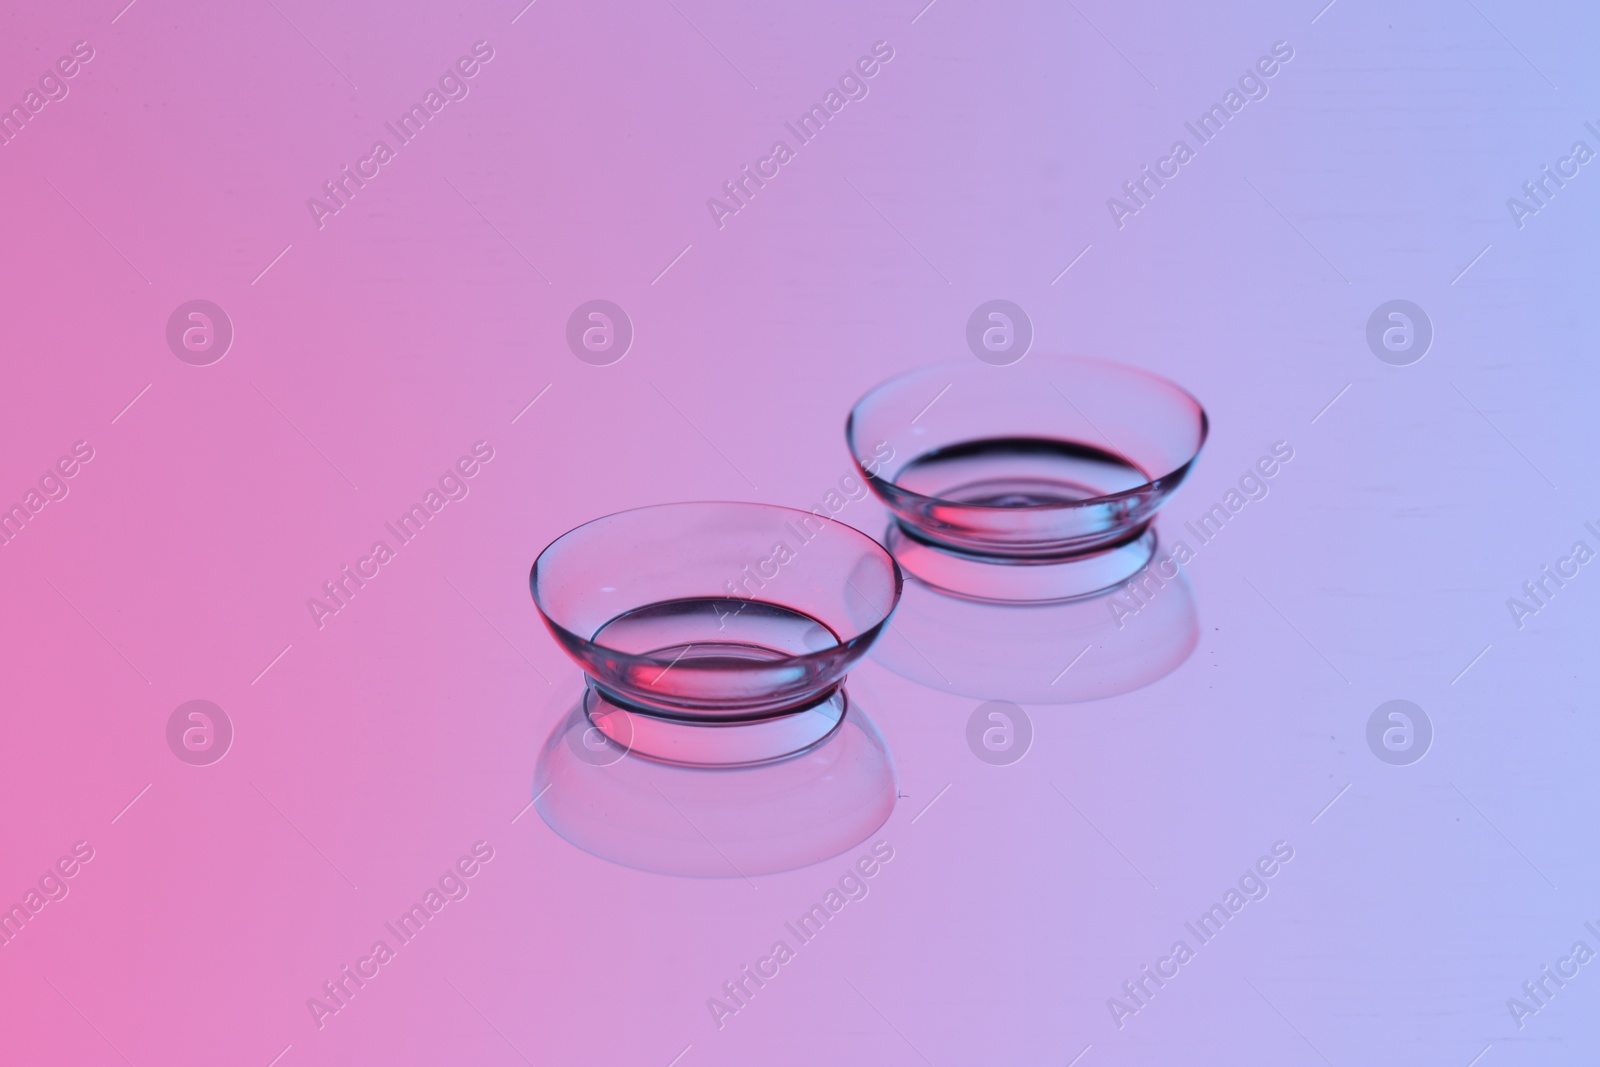 Photo of Pair of contact lenses on mirror surface